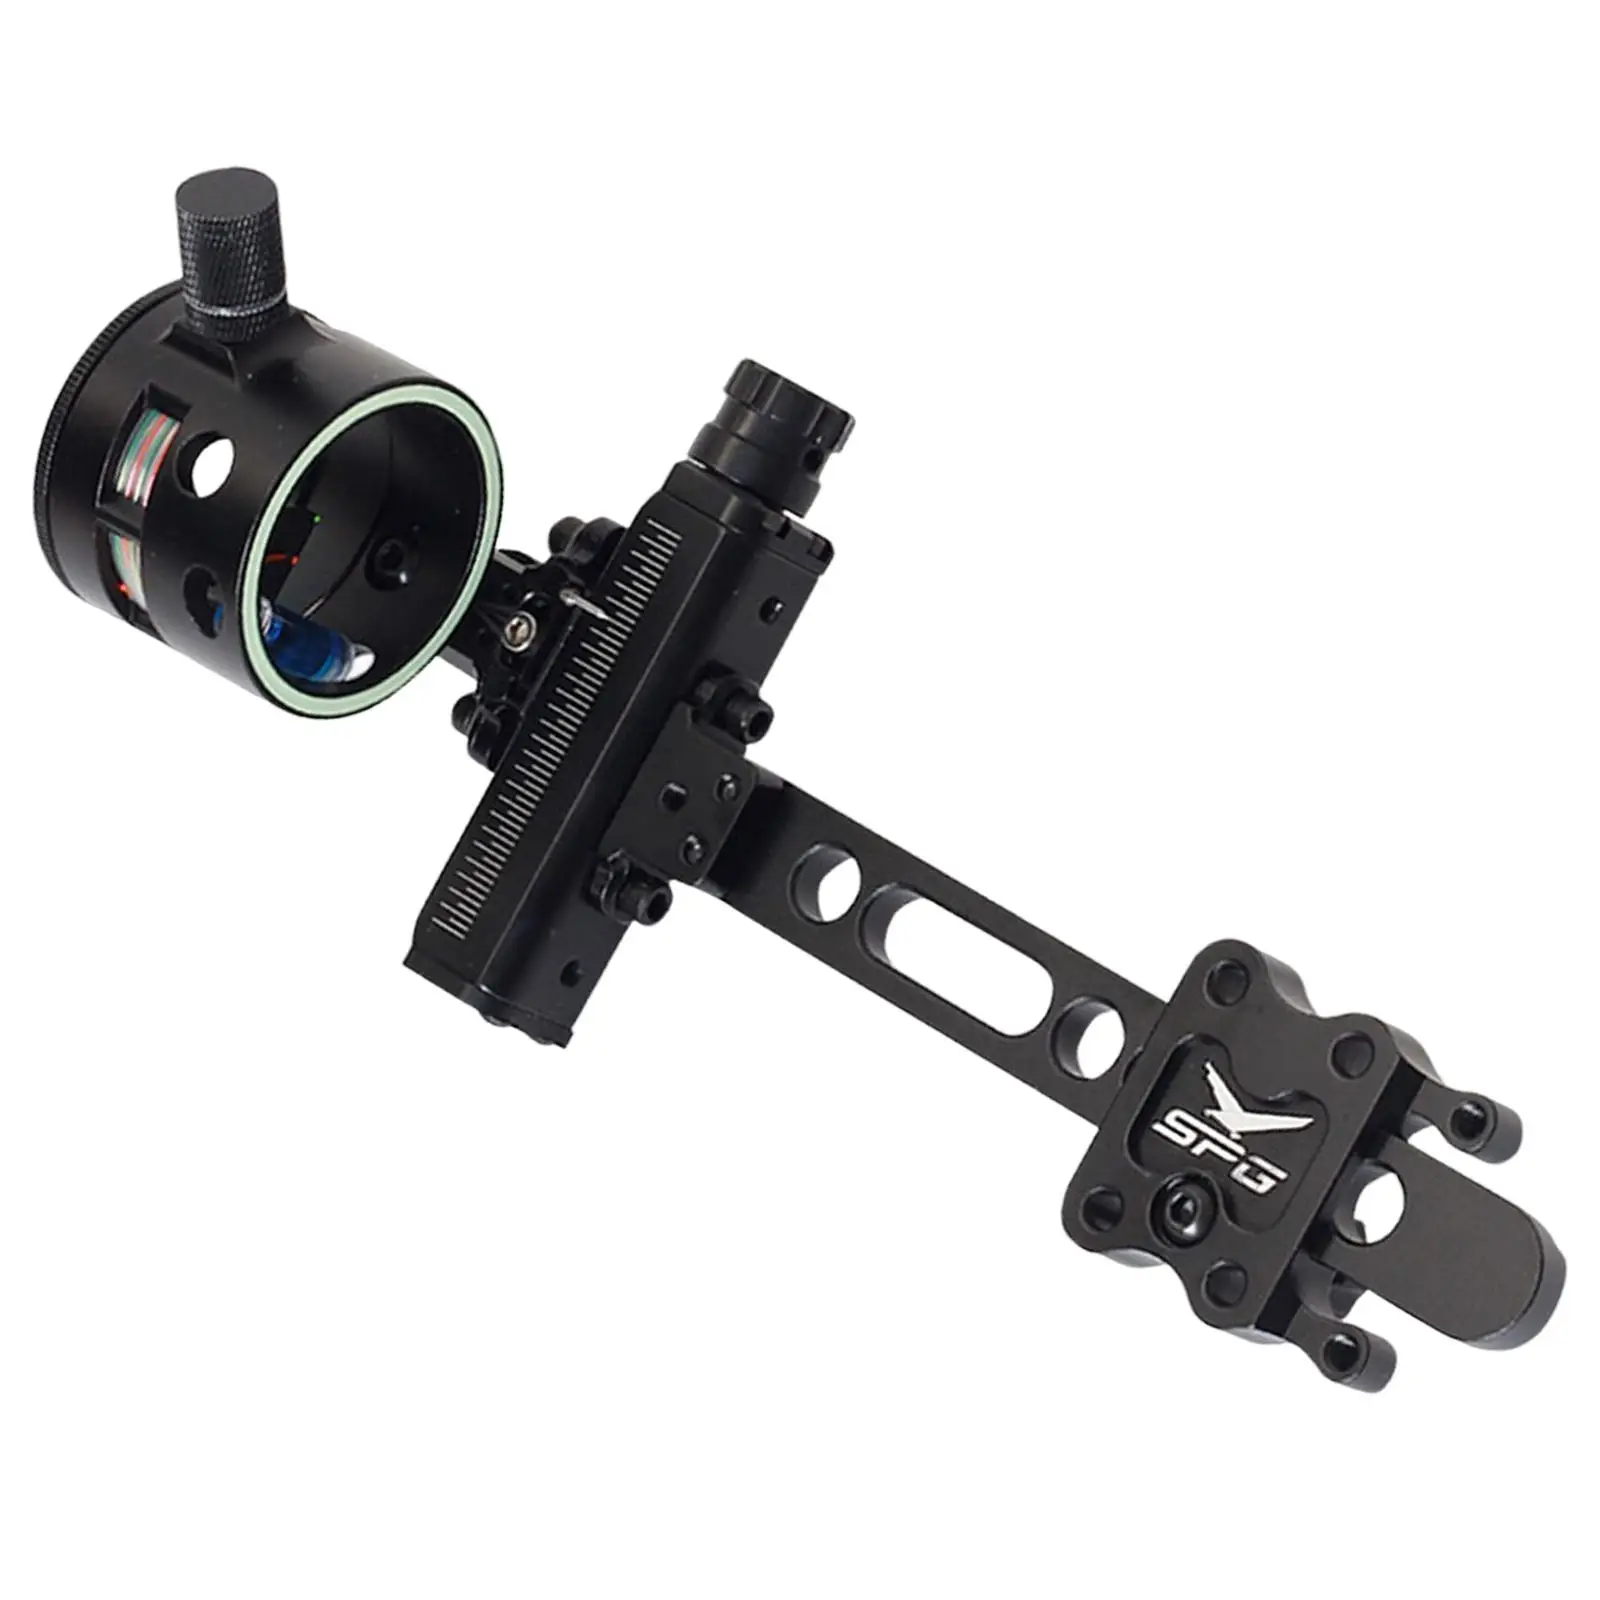 Fine Tuning Bow Sight Long Short Rod Tuning General 1 Pin for Target Shoot Hunting Outdoor Sport Bow Accessories Bow Accessory